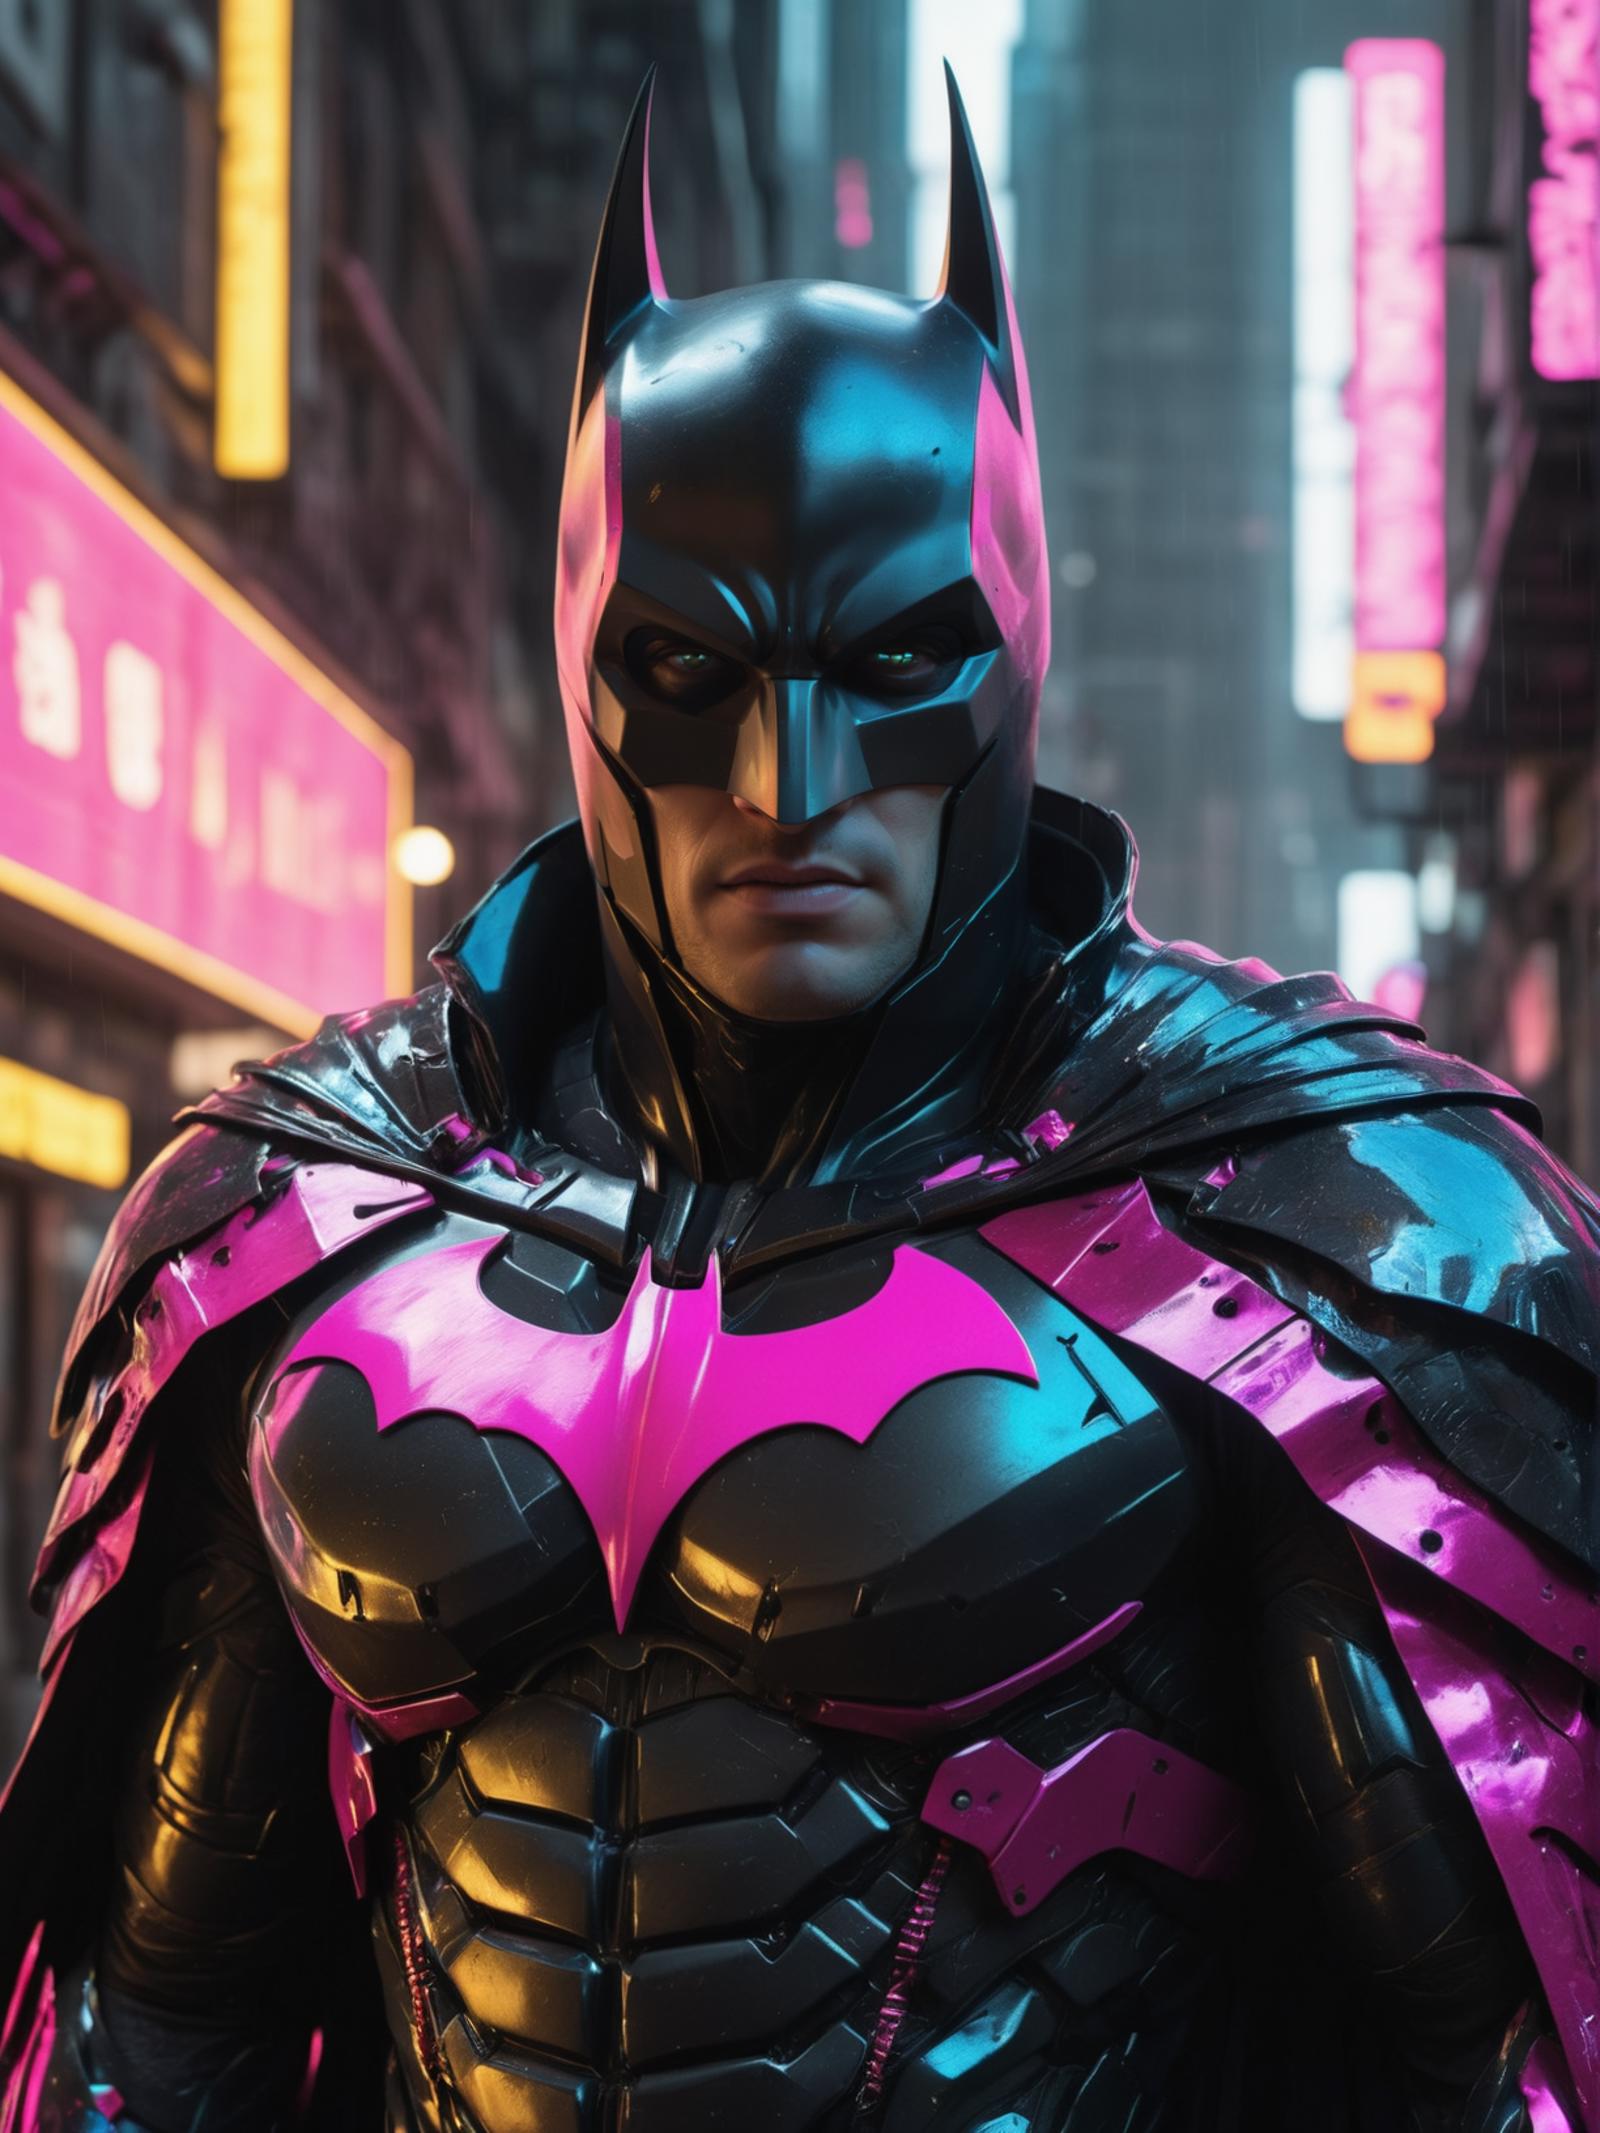 A Batman character wearing a black and pink costume on a city street.